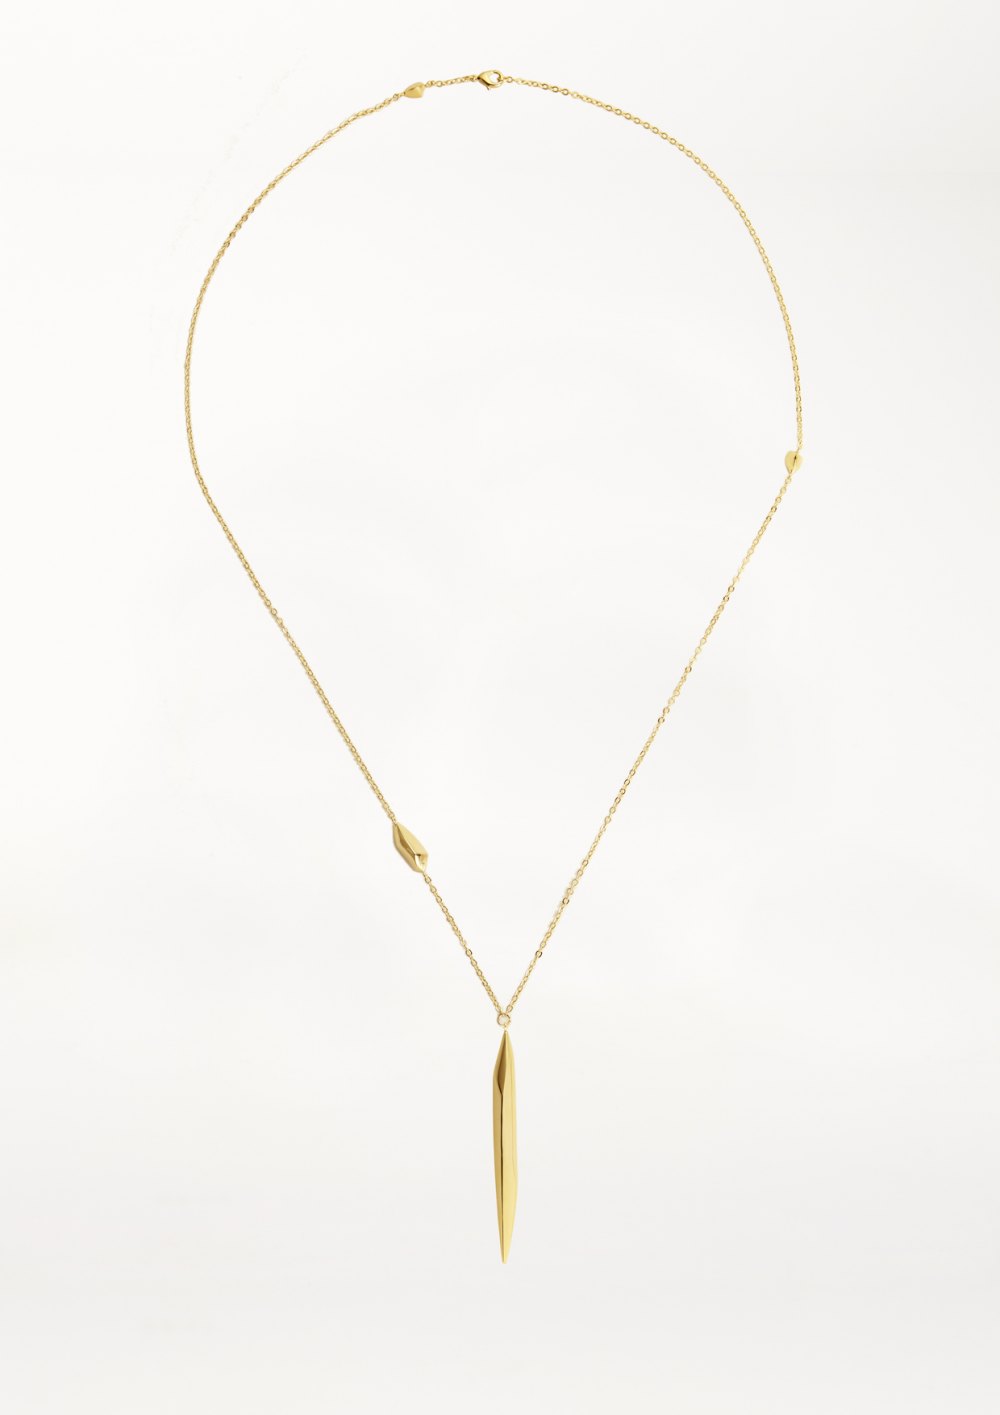  WASHED STONE COLLECTION XENIA BOUSStar Dust Necklace long Pendant Necklace in gold silver with sculptural pendant  elegant chain